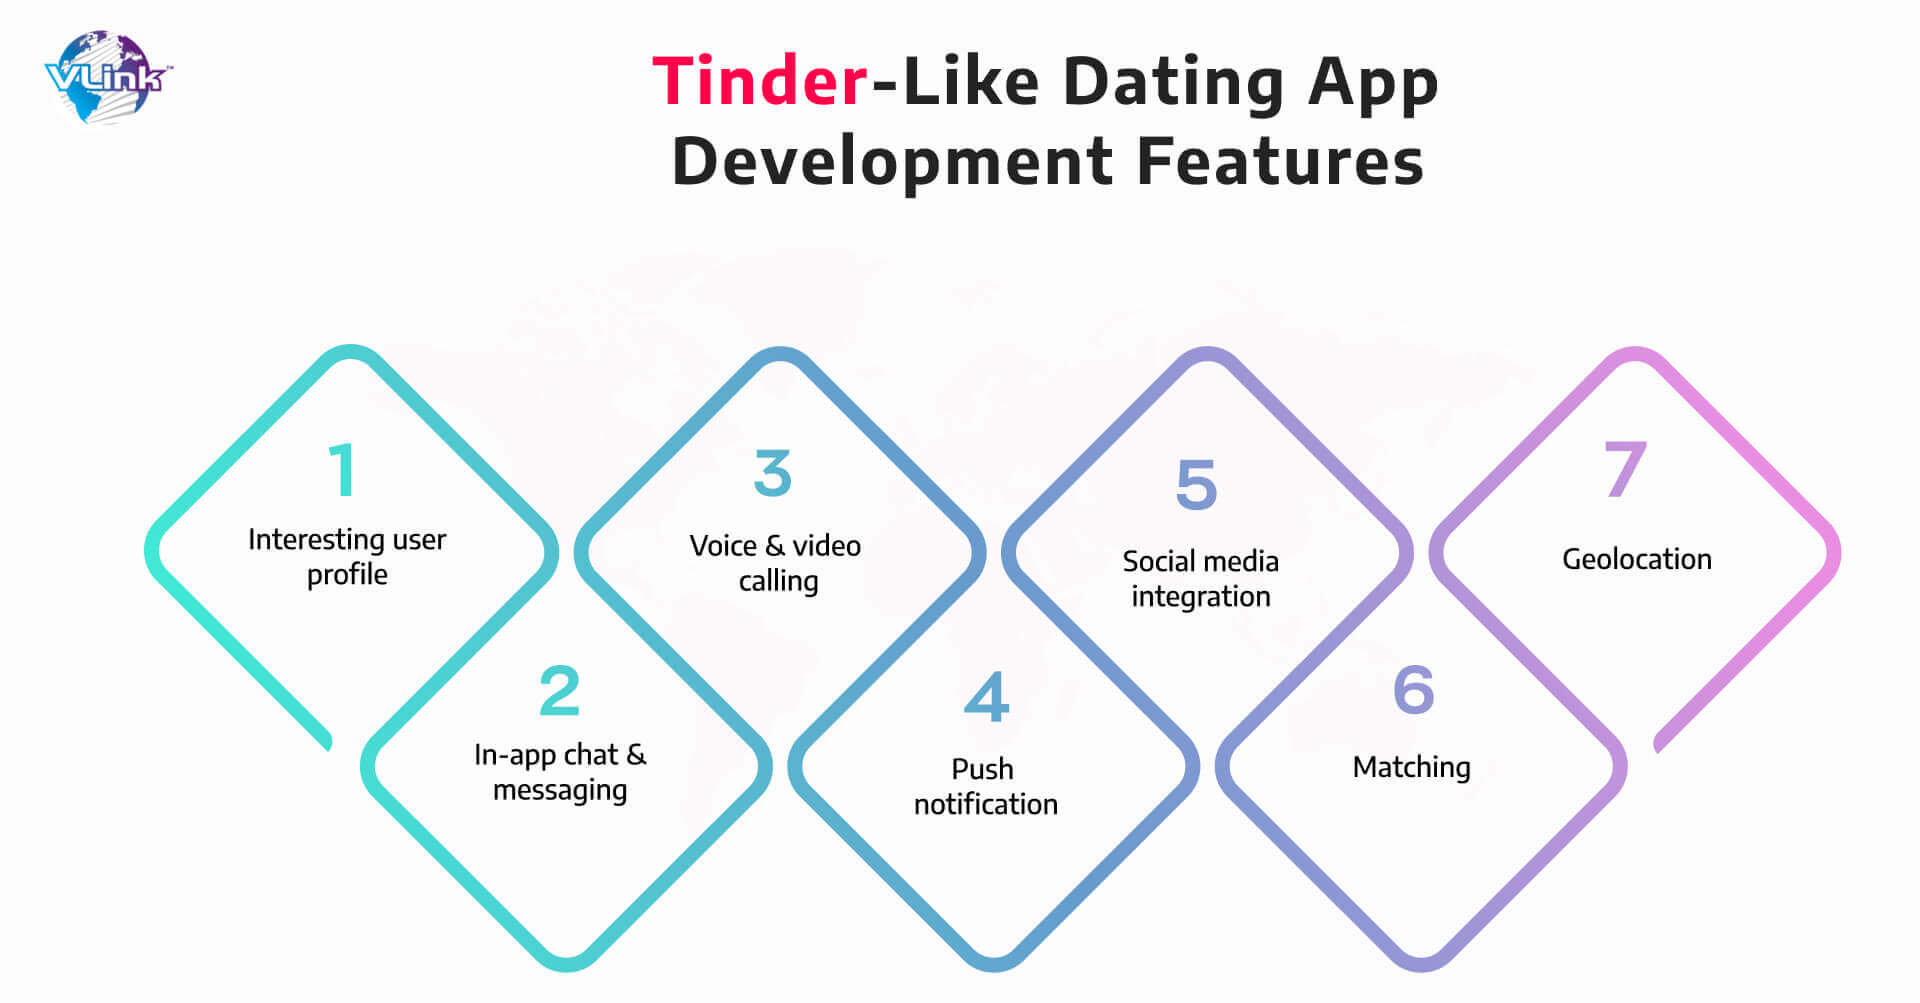 features to build a dating app like Tinder